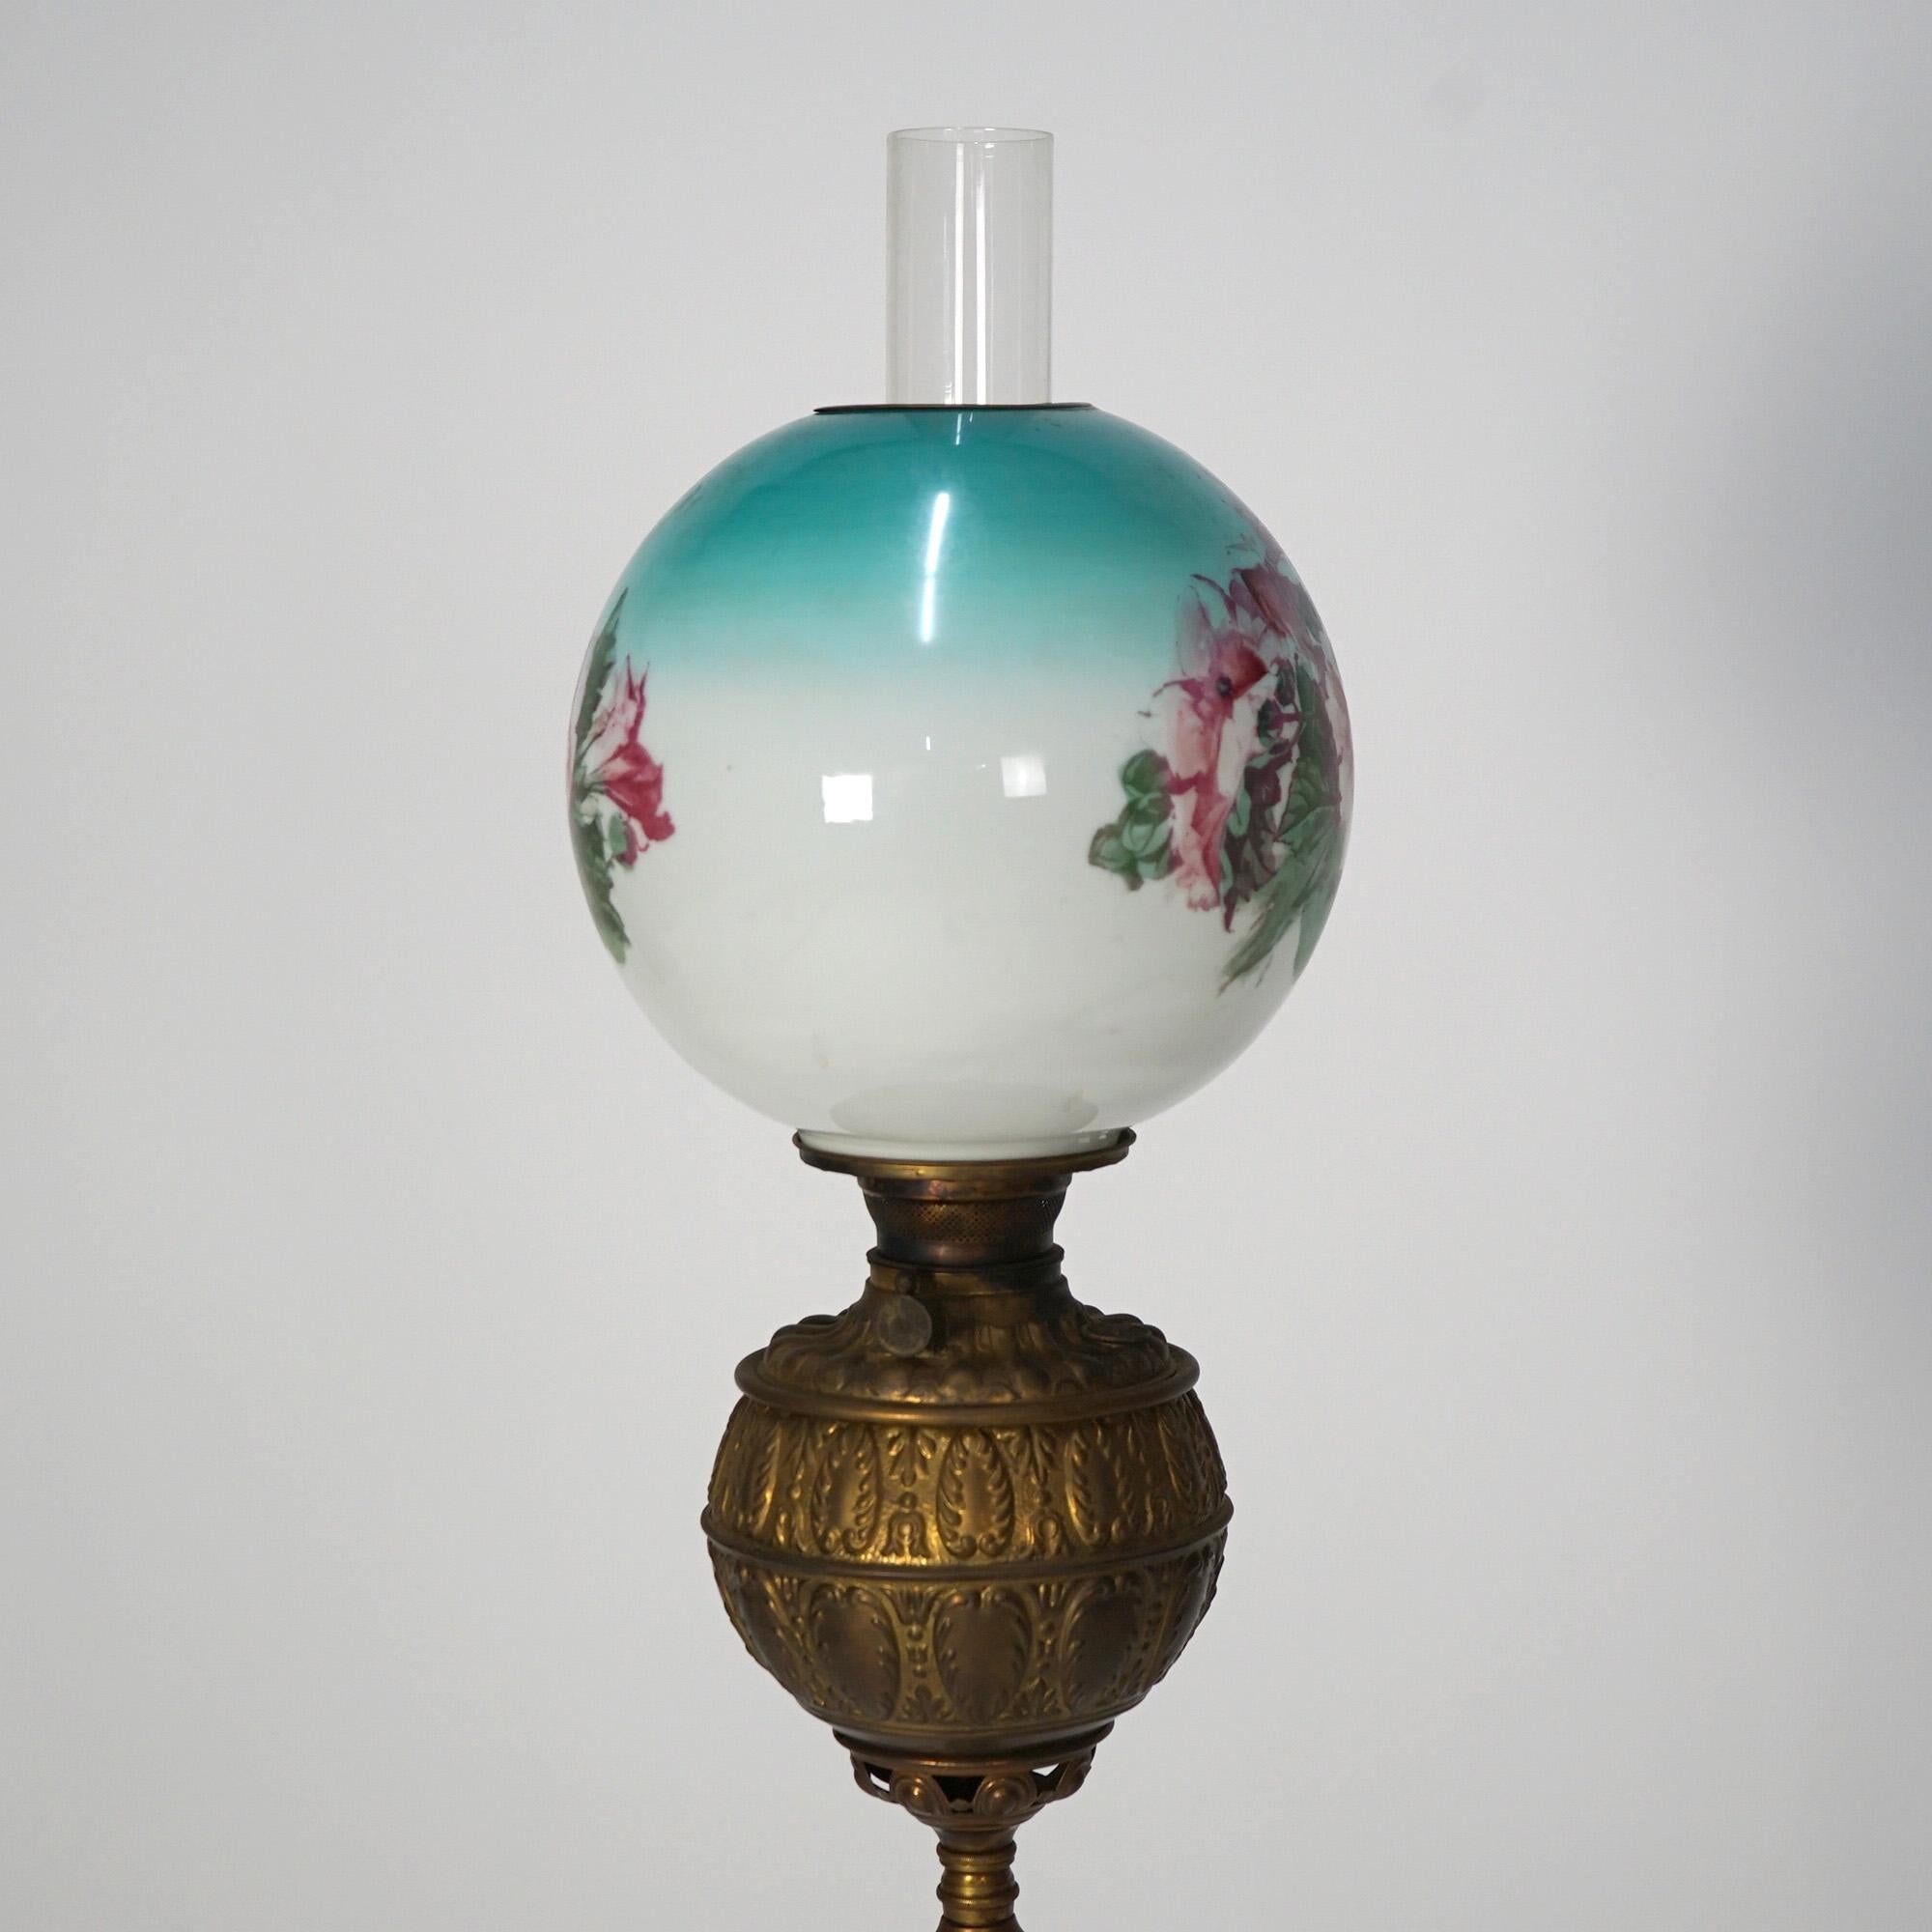 Antique Brass Telescoping Piano Oil Lamp & Hand Painted Floral Shade c1890 For Sale 4